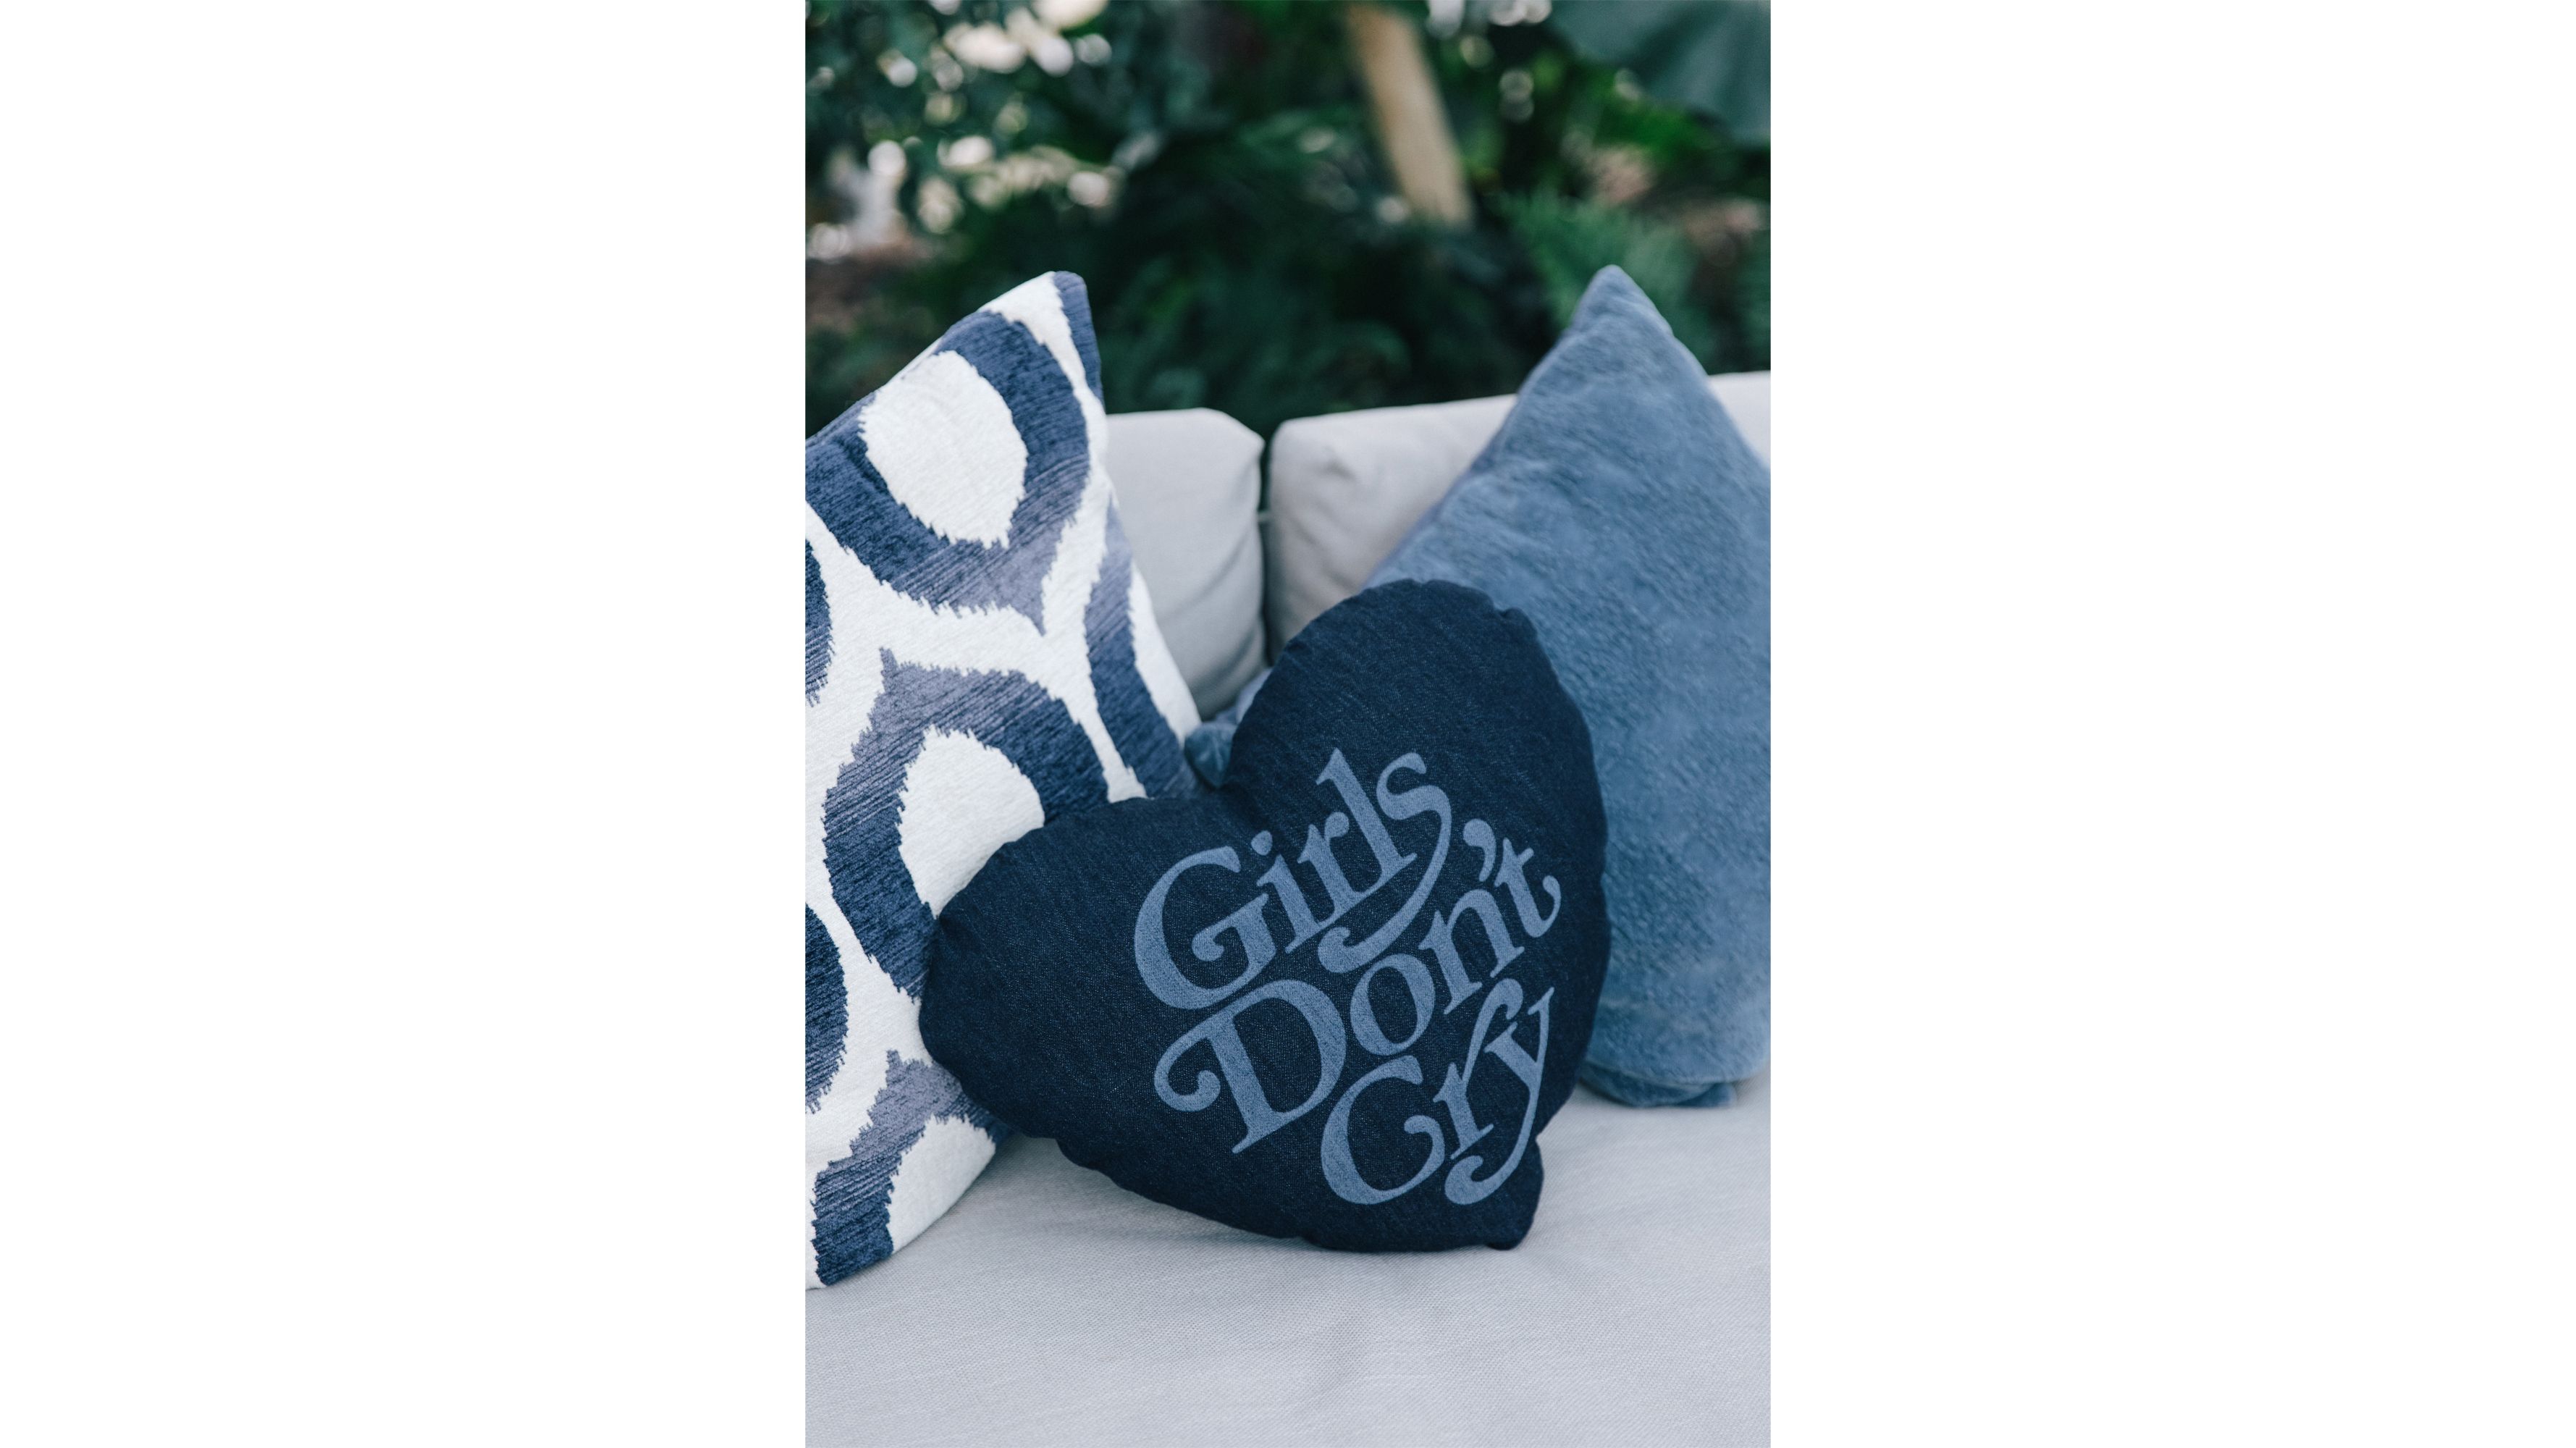 Levi's® X Girls Don't Cry Pillow - | Levi's® US